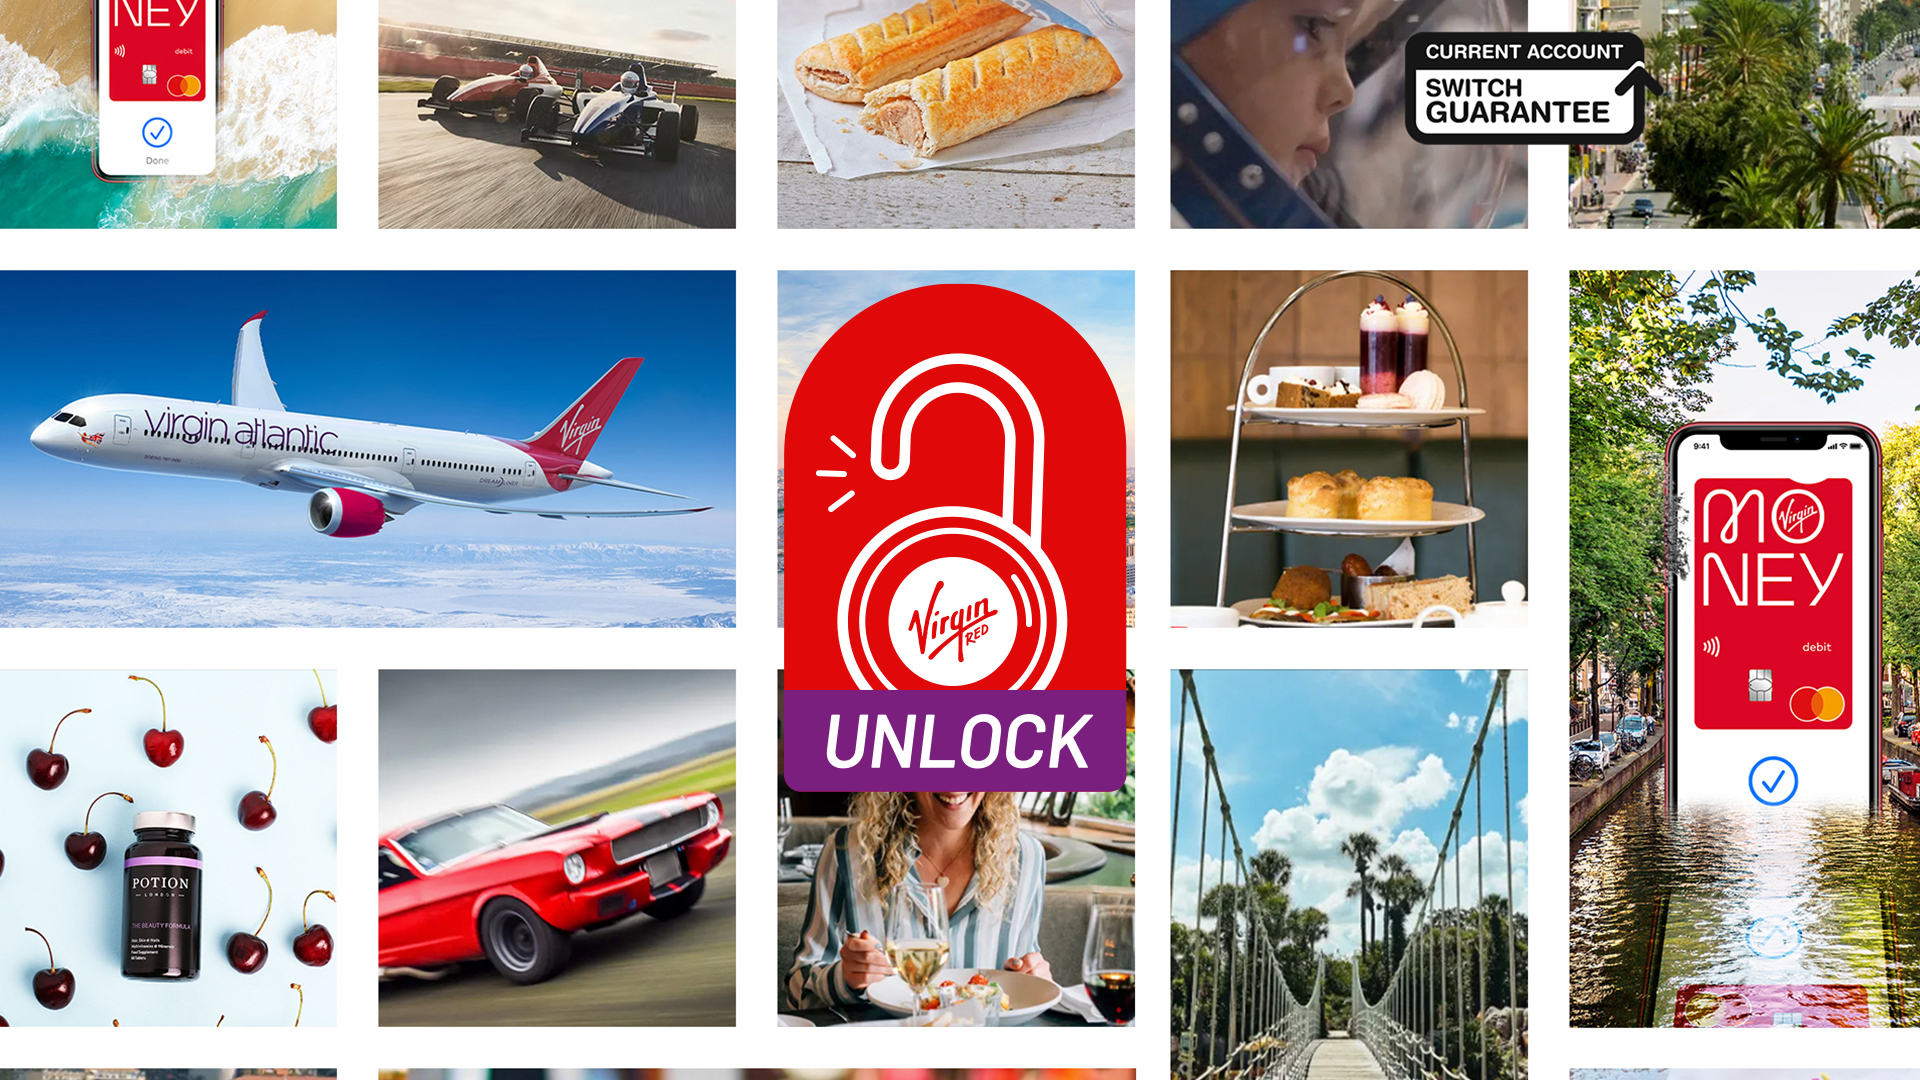 Image of what you could do with 20,000 Virgin Points, with an Unlock Virgin Red logo in the middle. 